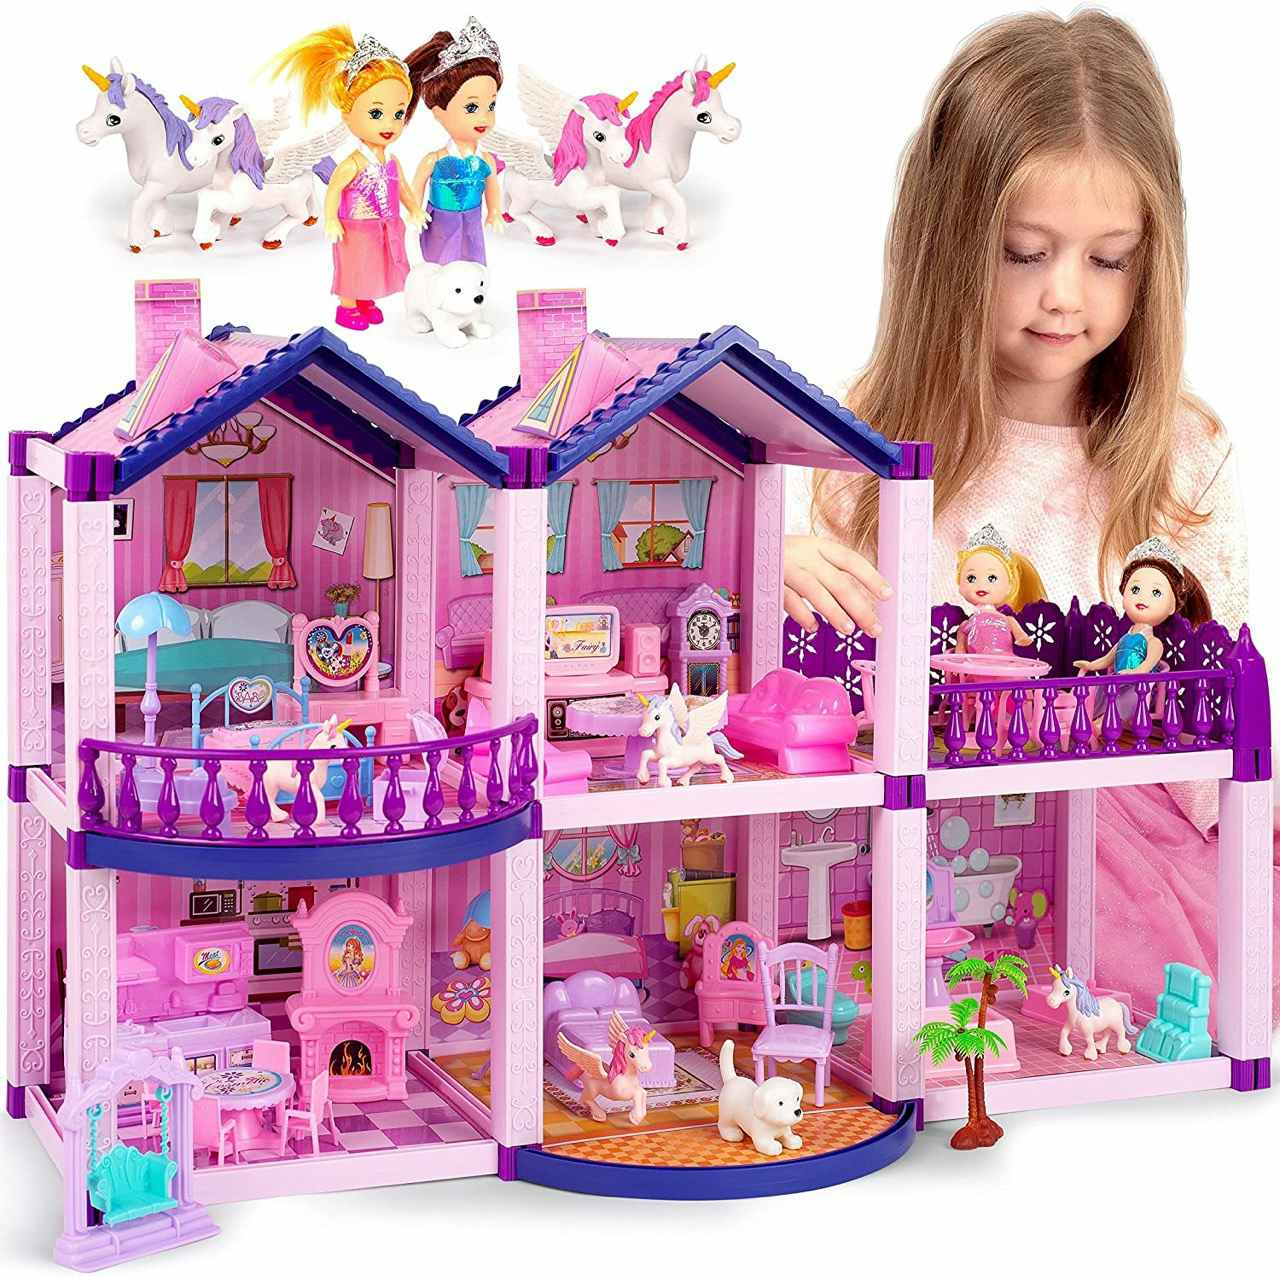 A child playing with a Tomleon Dollhouse with Princesses